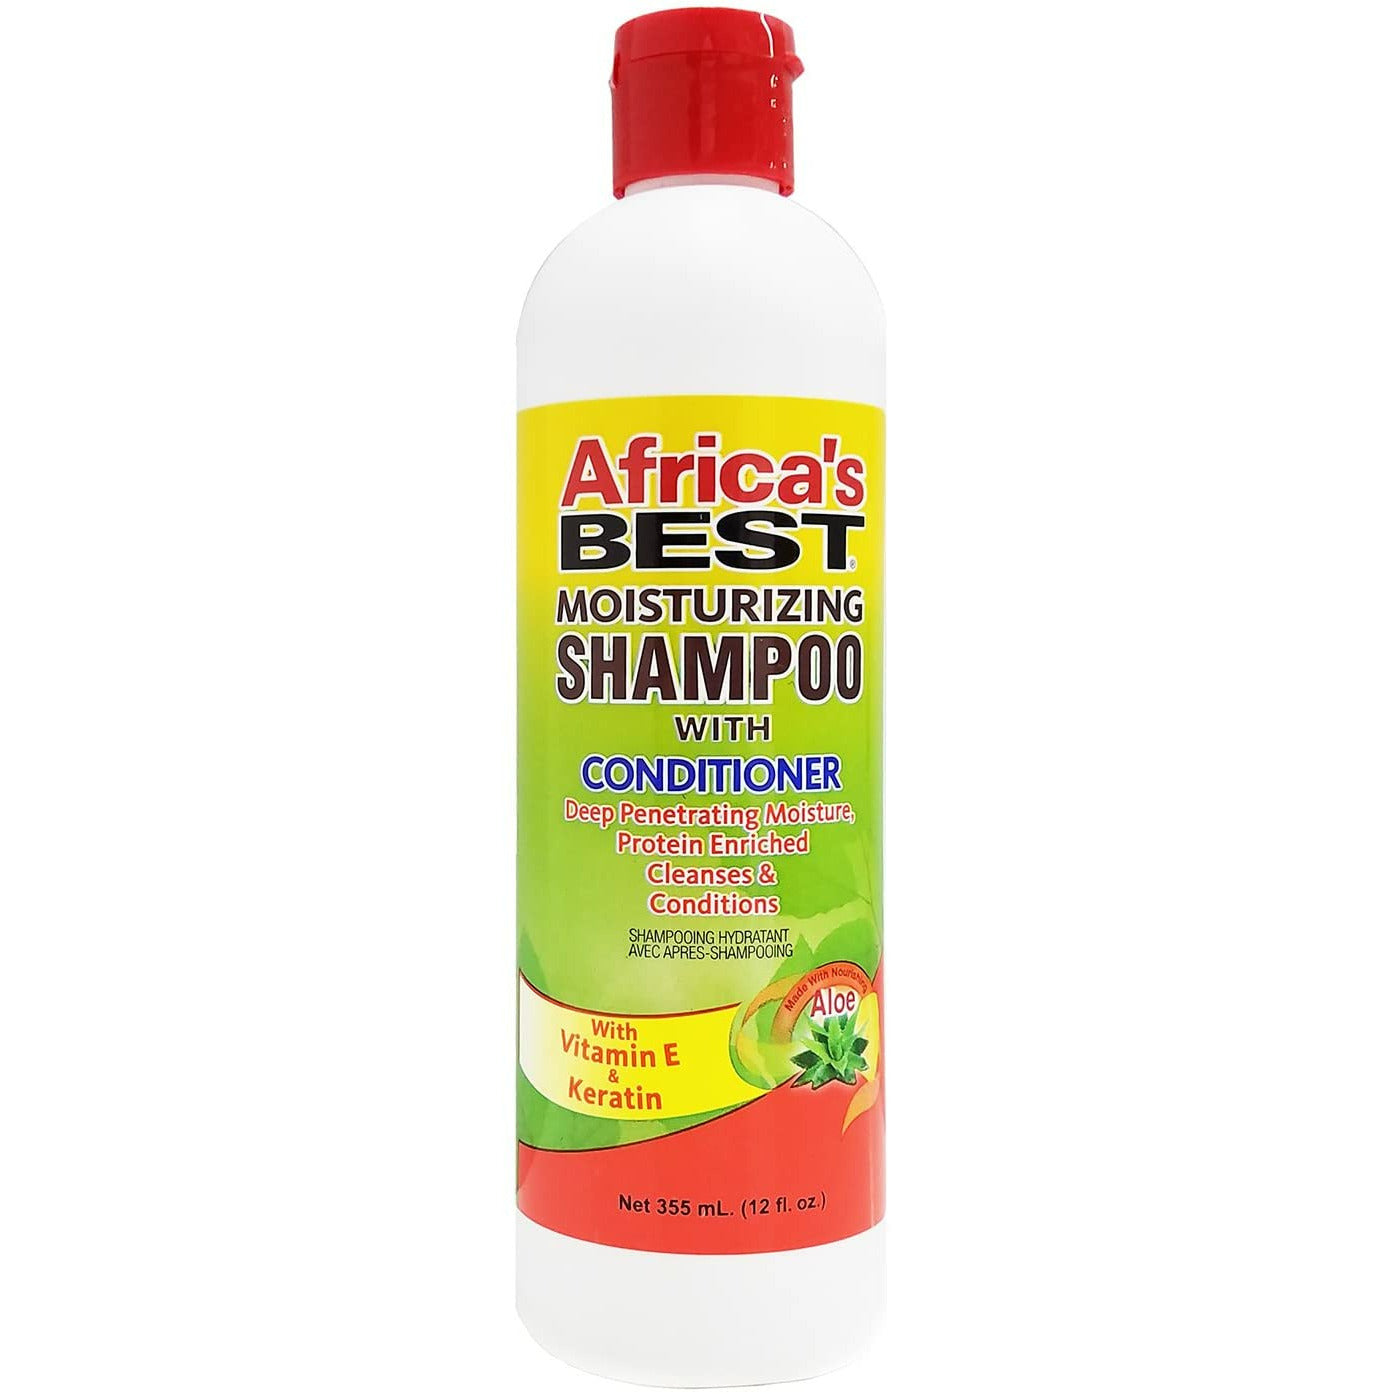 AFRICA'S BEST MOISTURIZING SHAMPOO + CONDITIONER 12oz-Africa's Best- Hive Beauty Supply